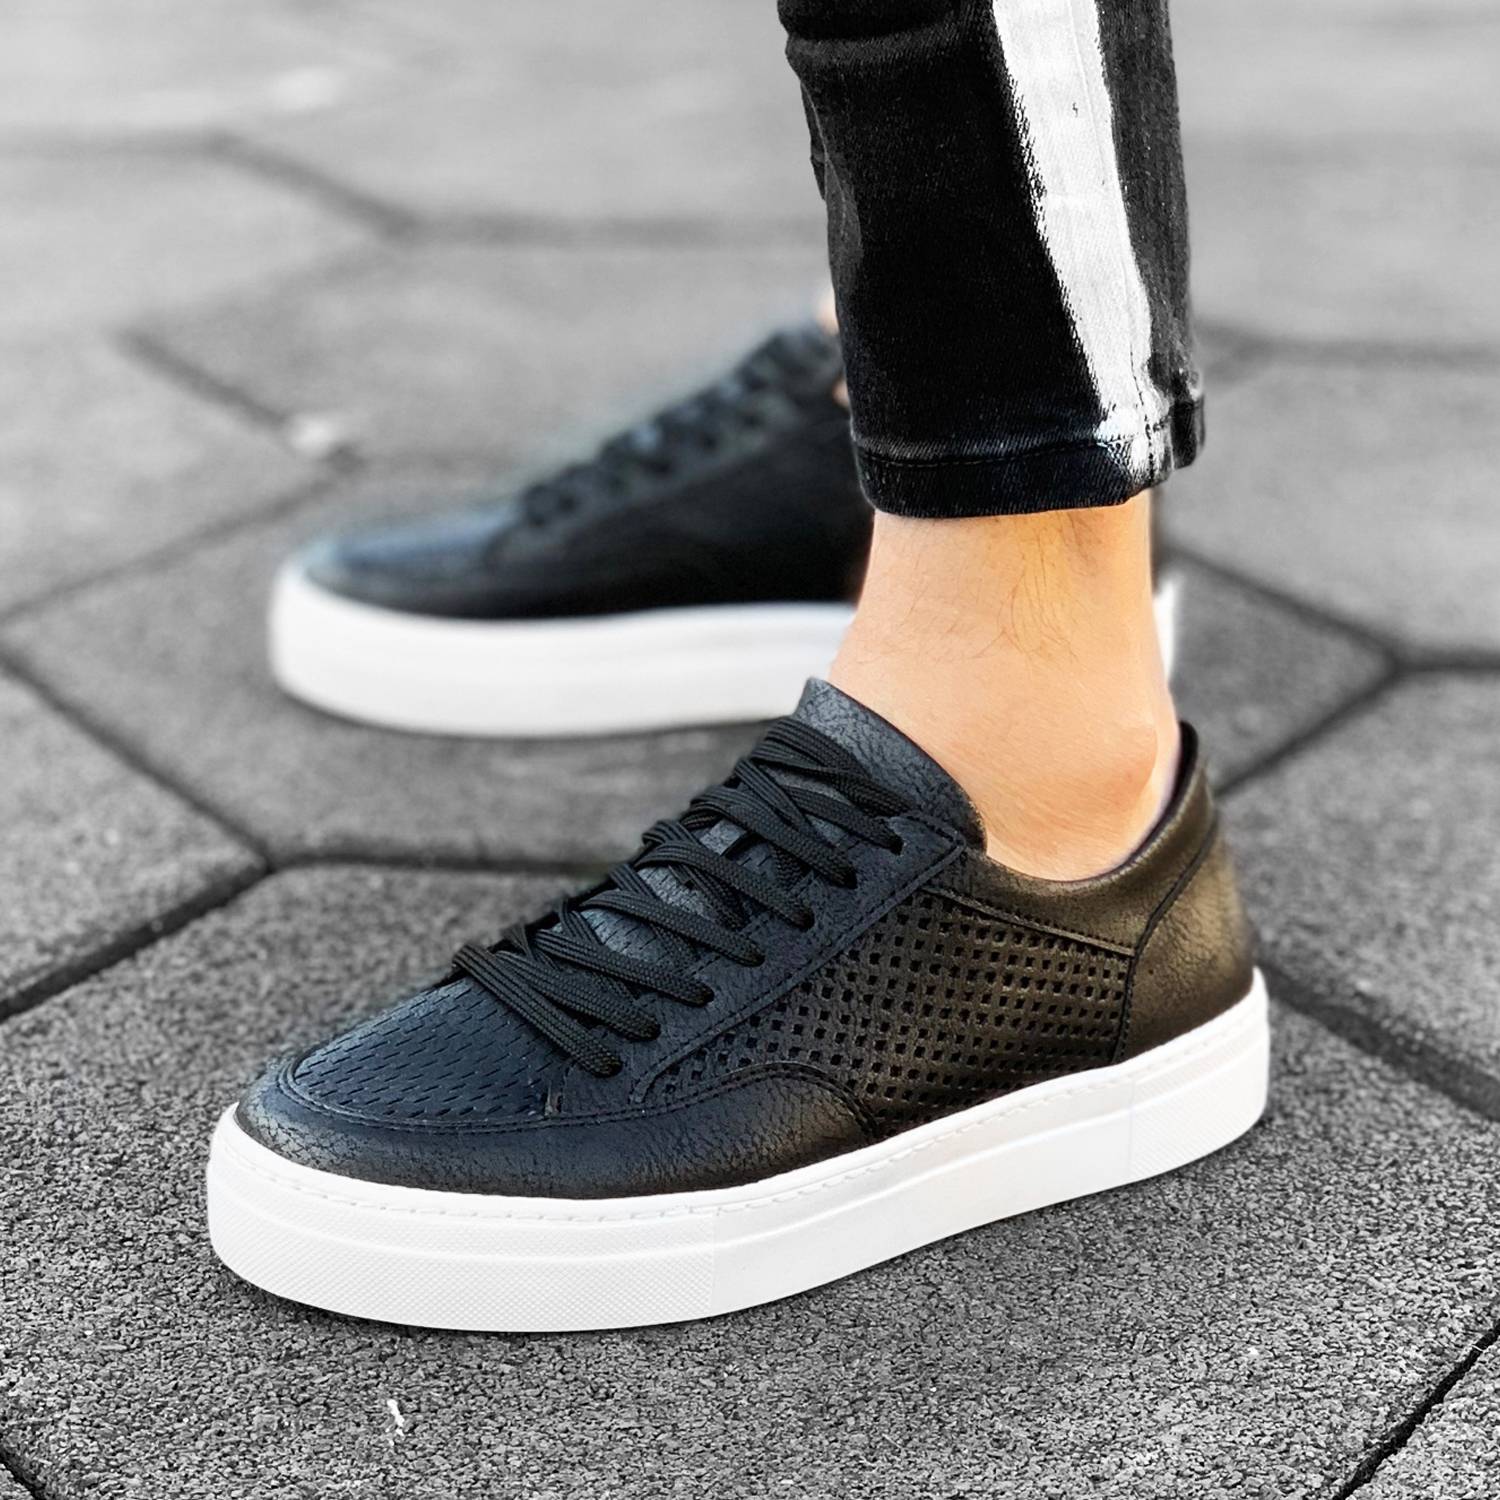 Men's New Stylish Dotted Sneakers Black